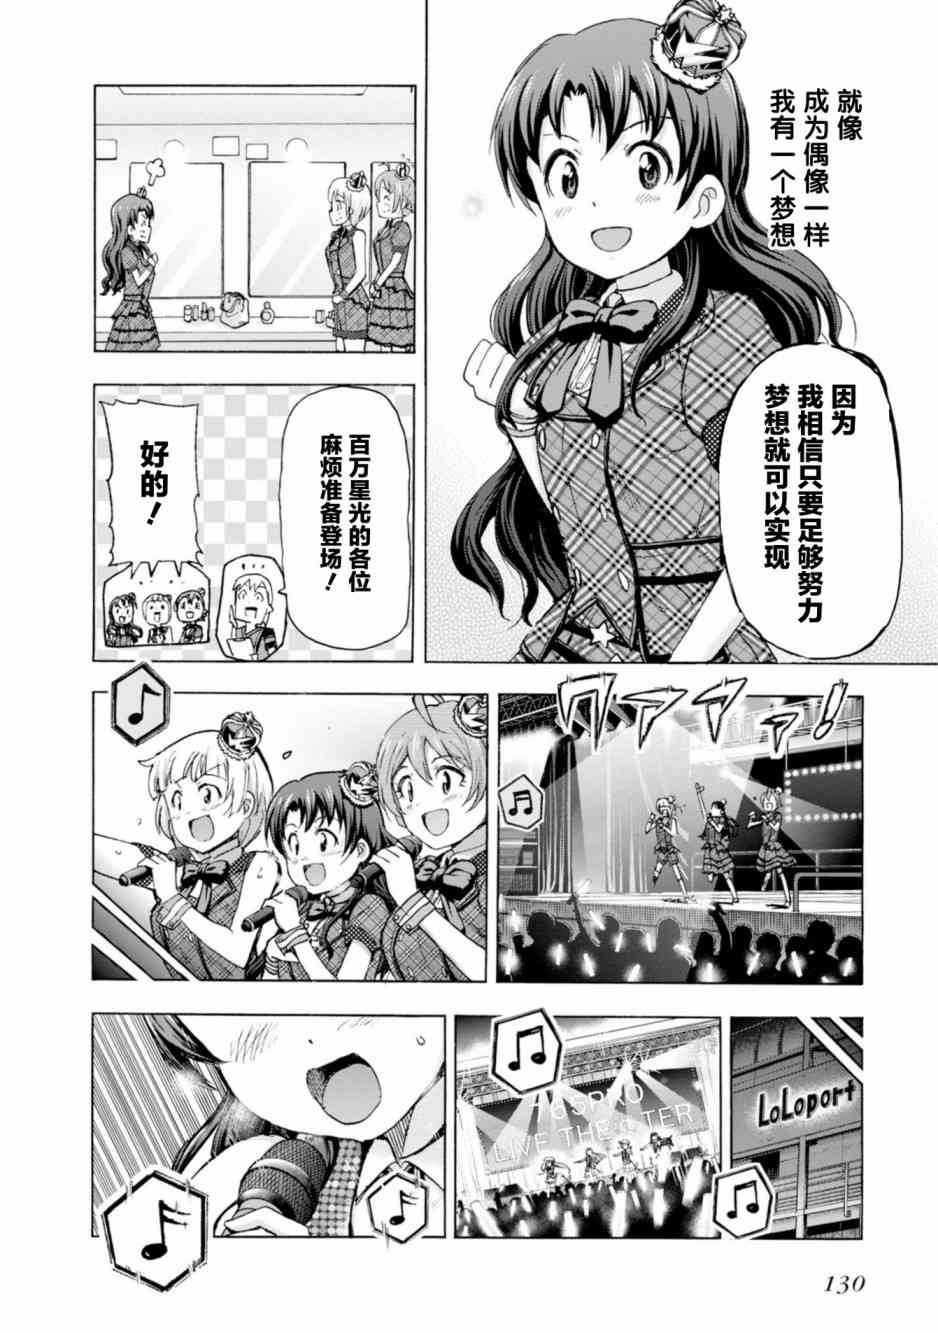 THE IDOLM@STER MILLION LIVE! Blooming Clover - 18話(1/2) - 2